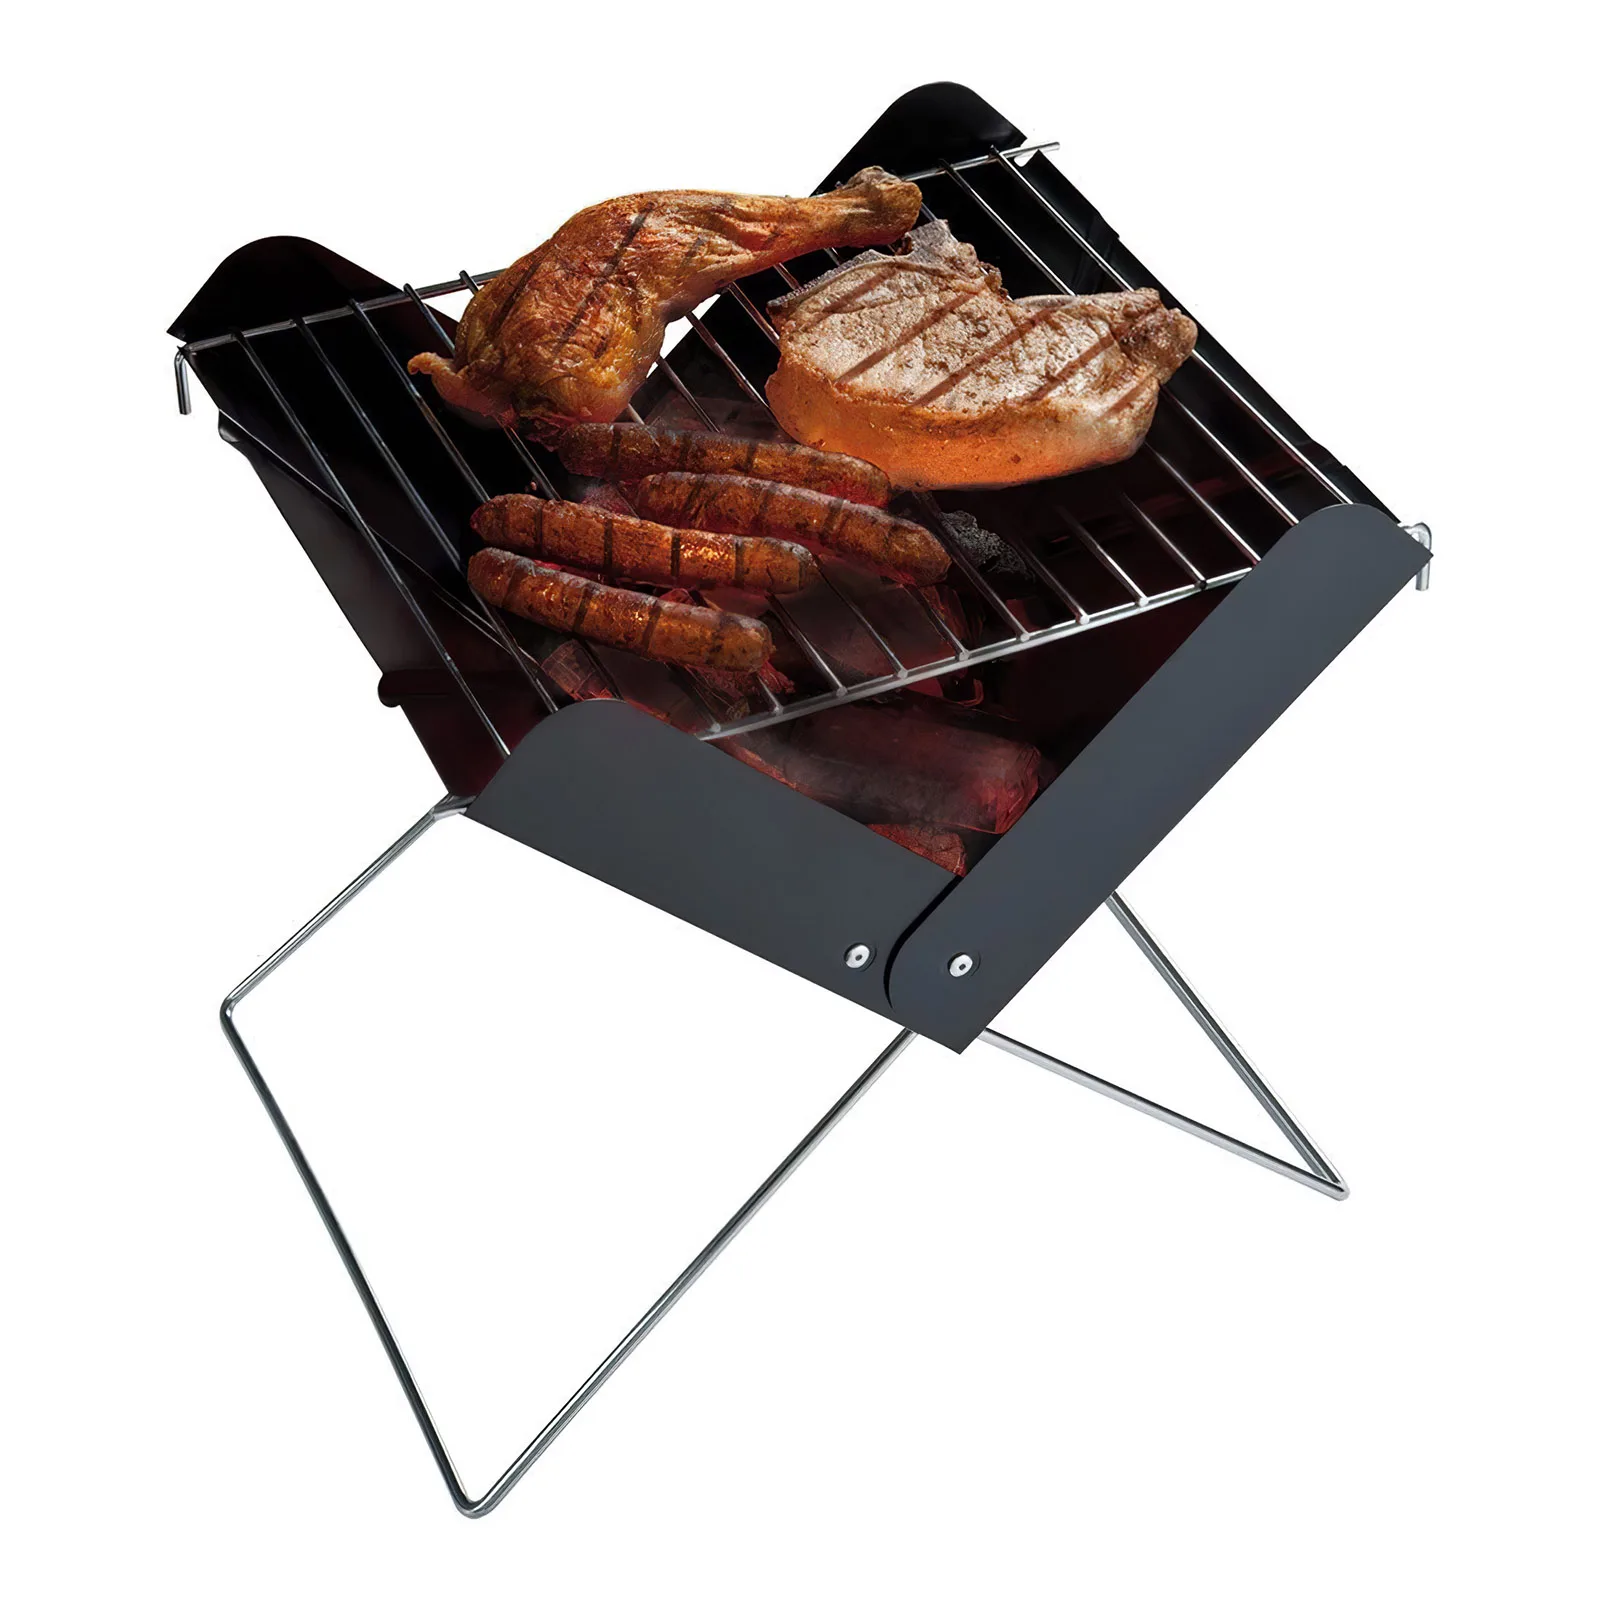 

X-shaped Foldable Grill Rack Collapsible Small Portable Stainless Steel Charcoal Barbecue Stove Camping Picnic Garden Outdoor